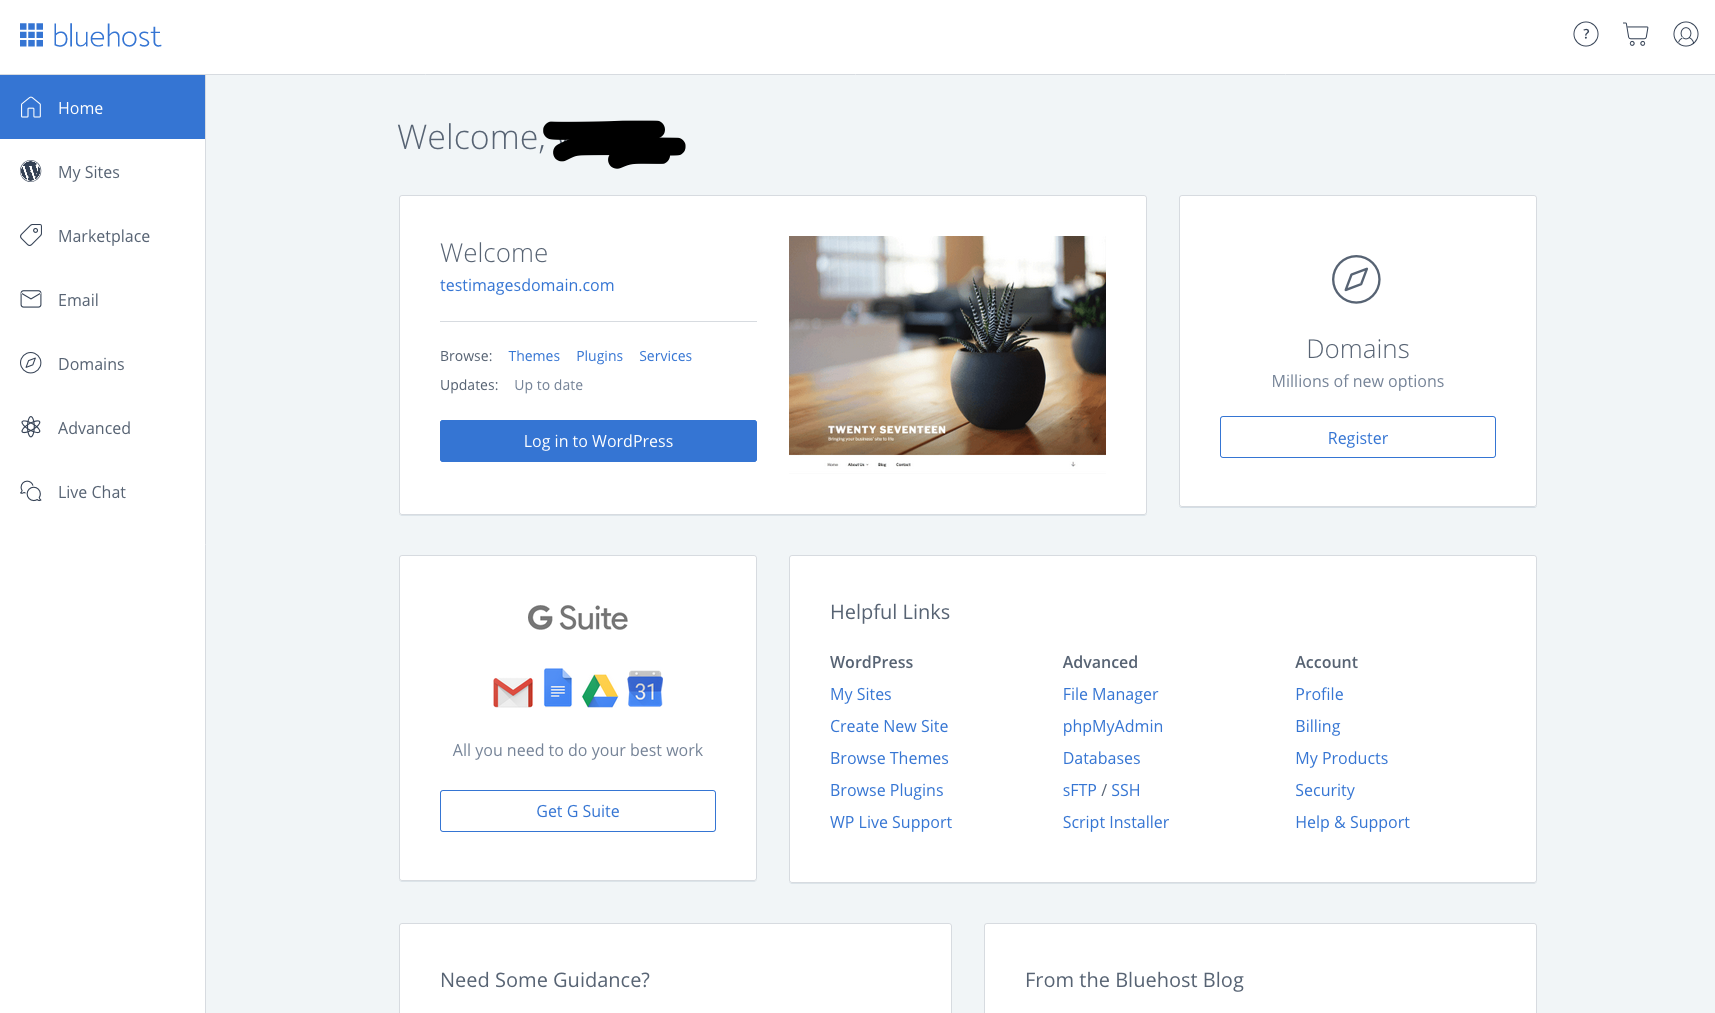 Welcome screen of Bluehost